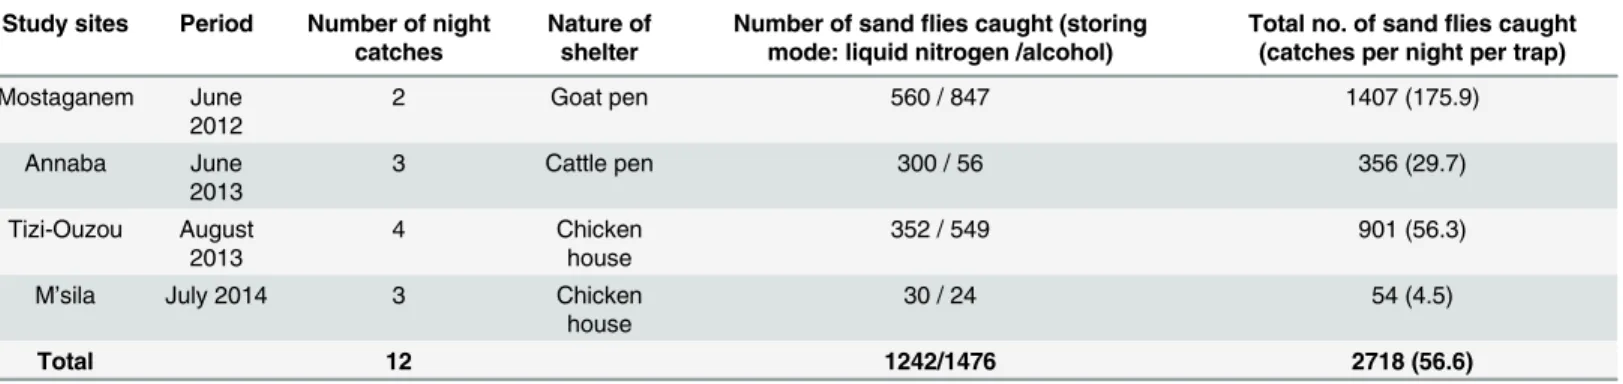 Table 1. Details of the phlebotomine sand flies capture and study sites.